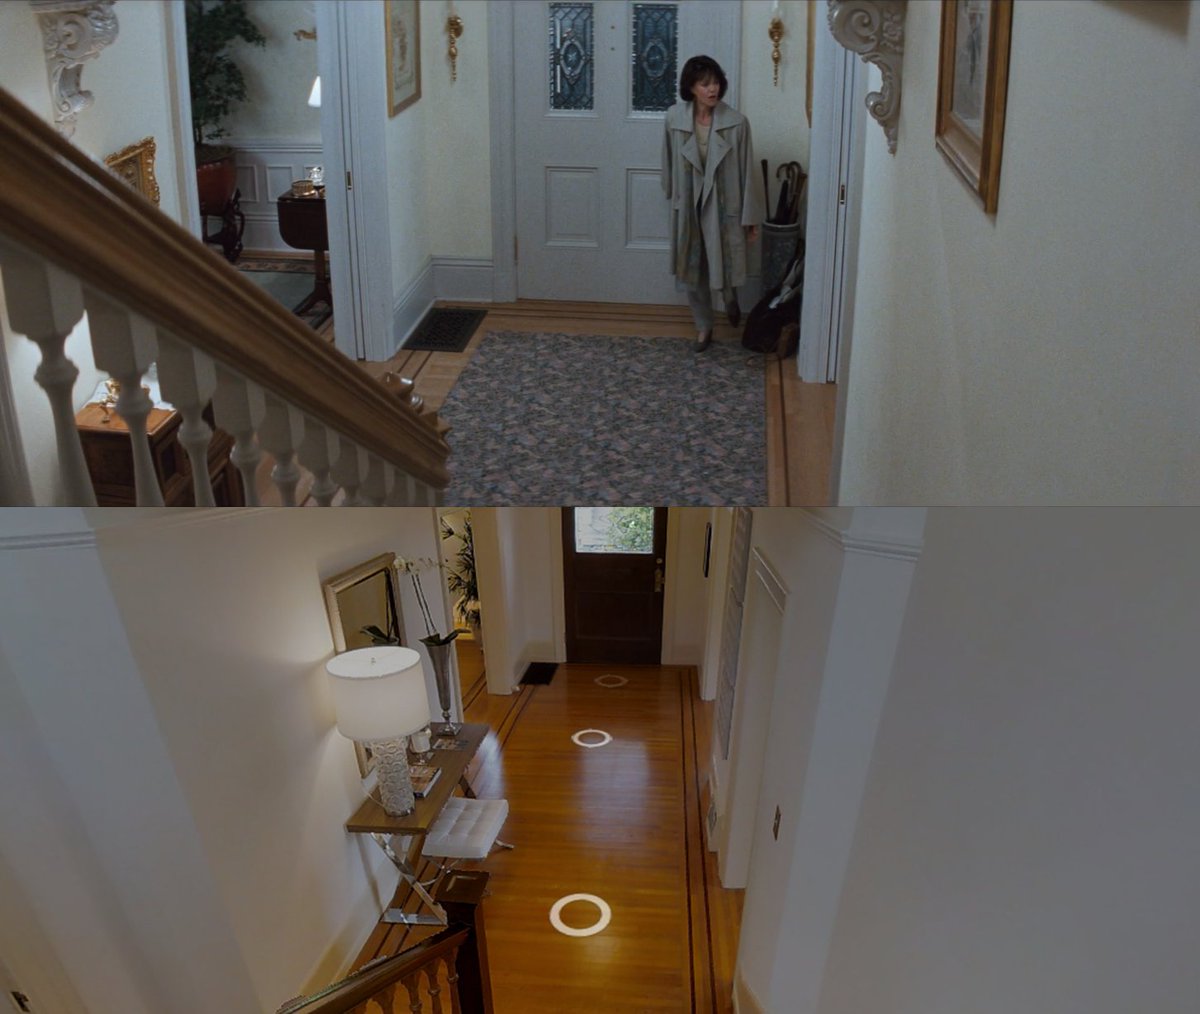 Props to the cinematographer, who constantly worked to make the stairs look like they're right at the front door. They're more so at the back of the house, with 2 entries to the living room to the right and dining room / kitchen entries on the left.